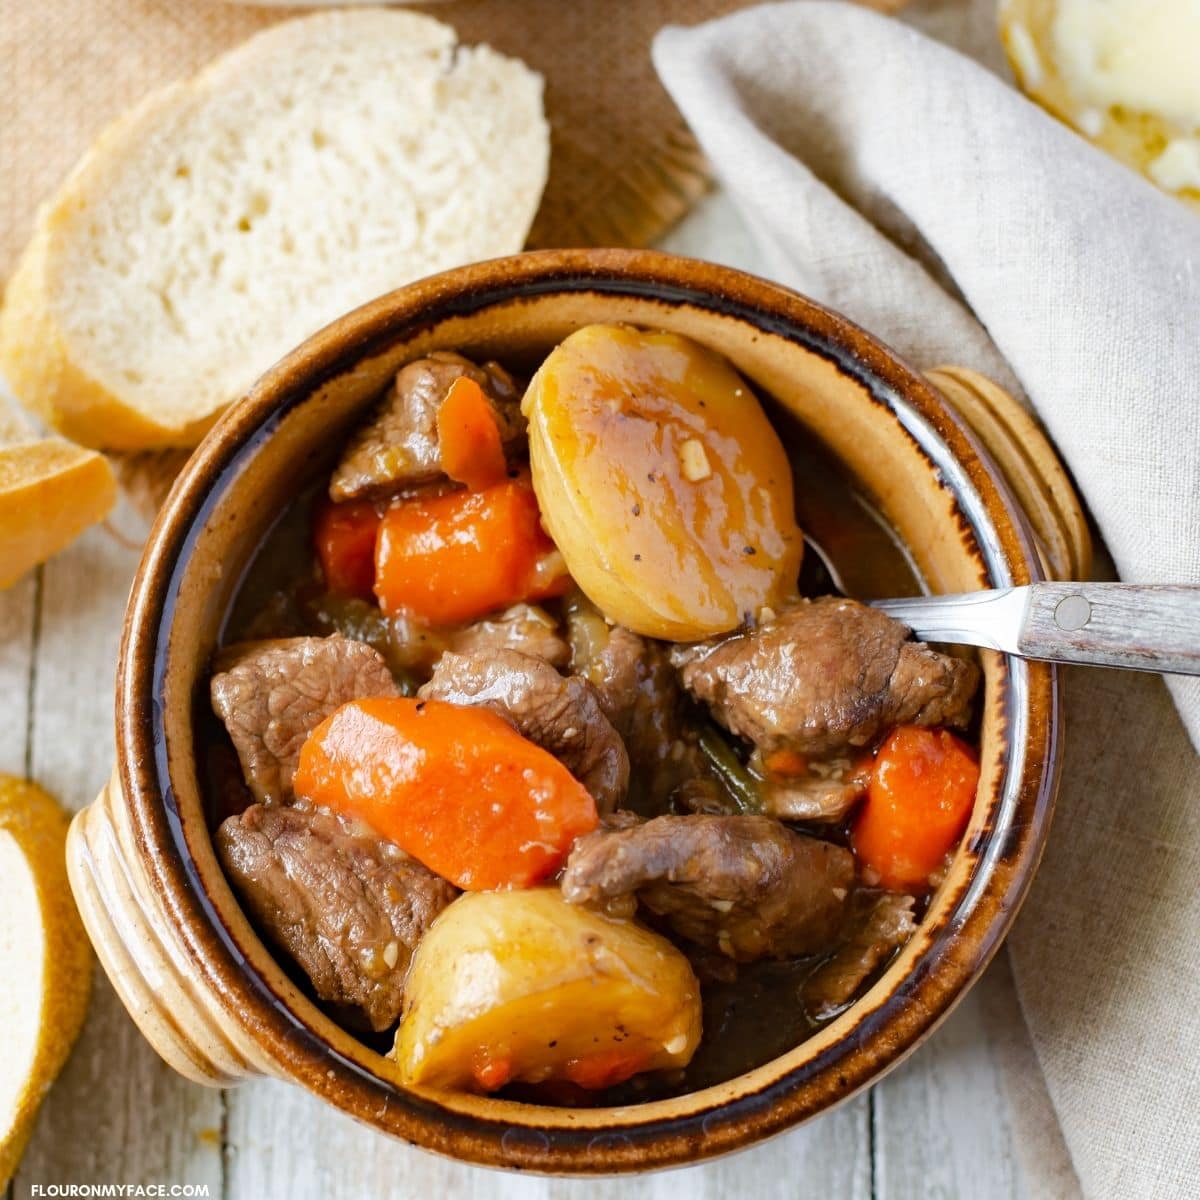 Overhead image of a crock like bowl filled with beef stew with sliced french bread around the bowl.